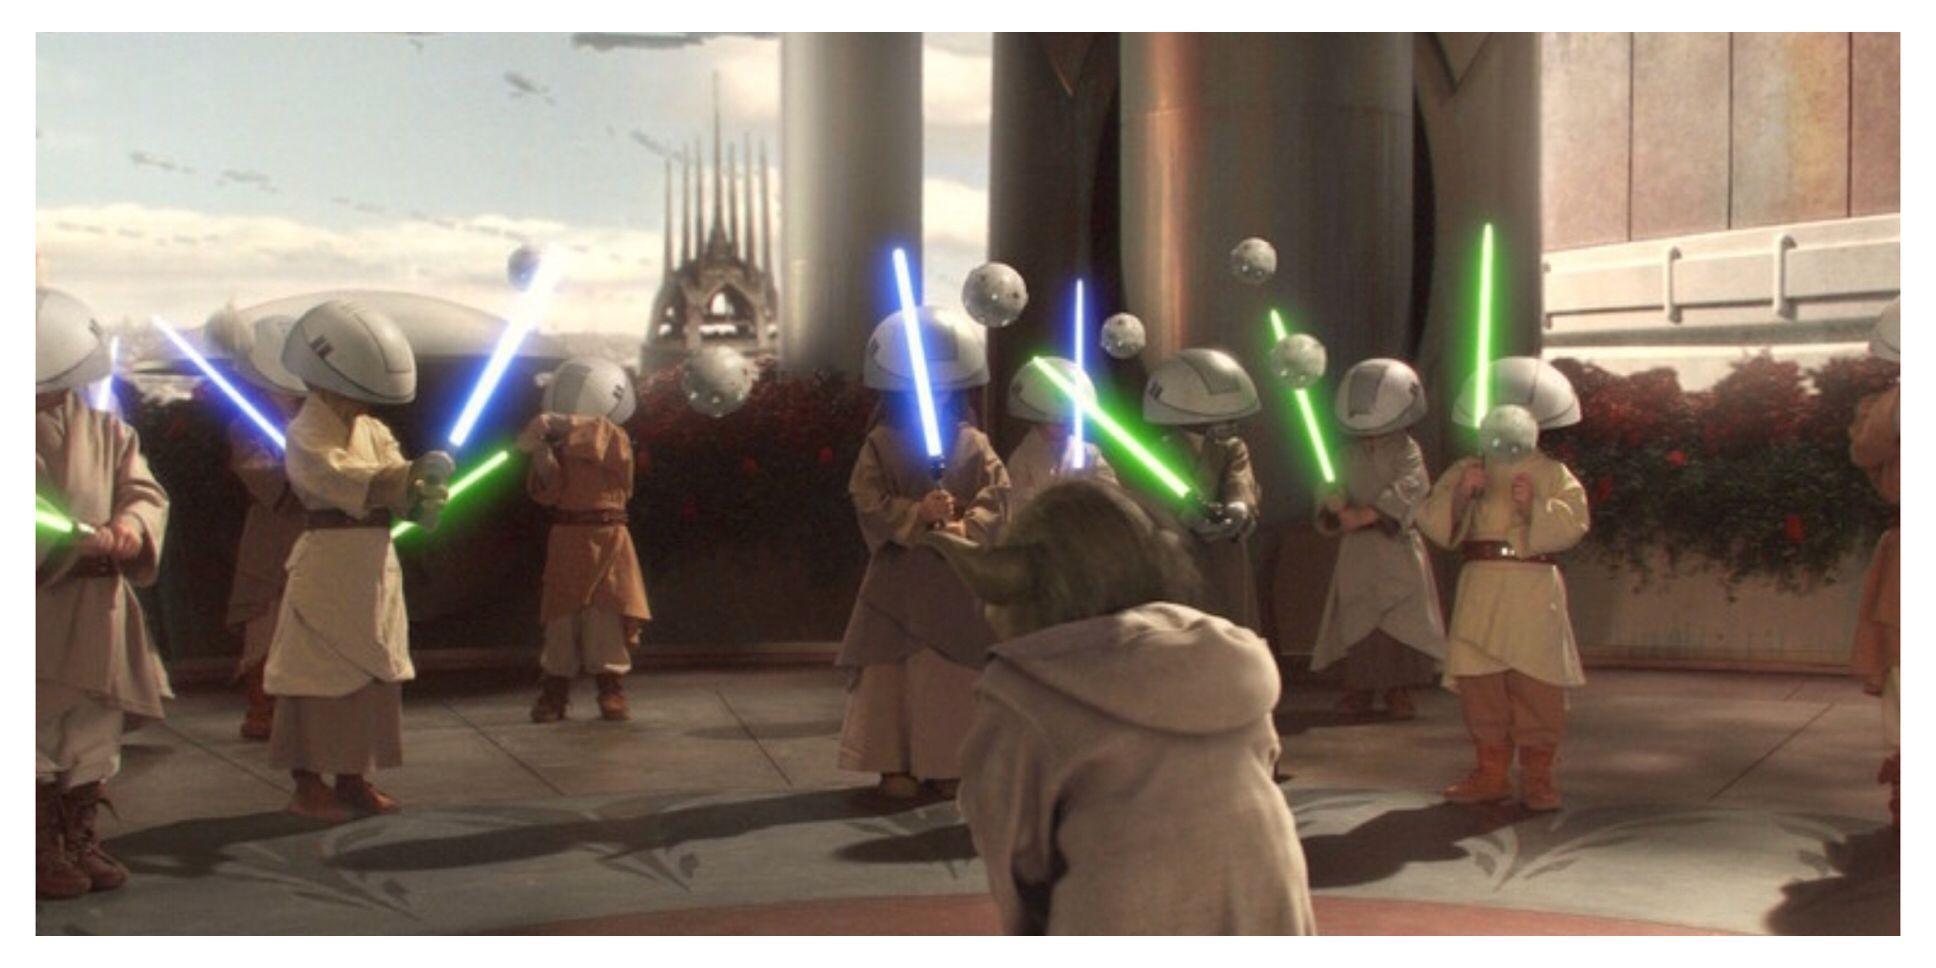 Younglings with Lightsabers